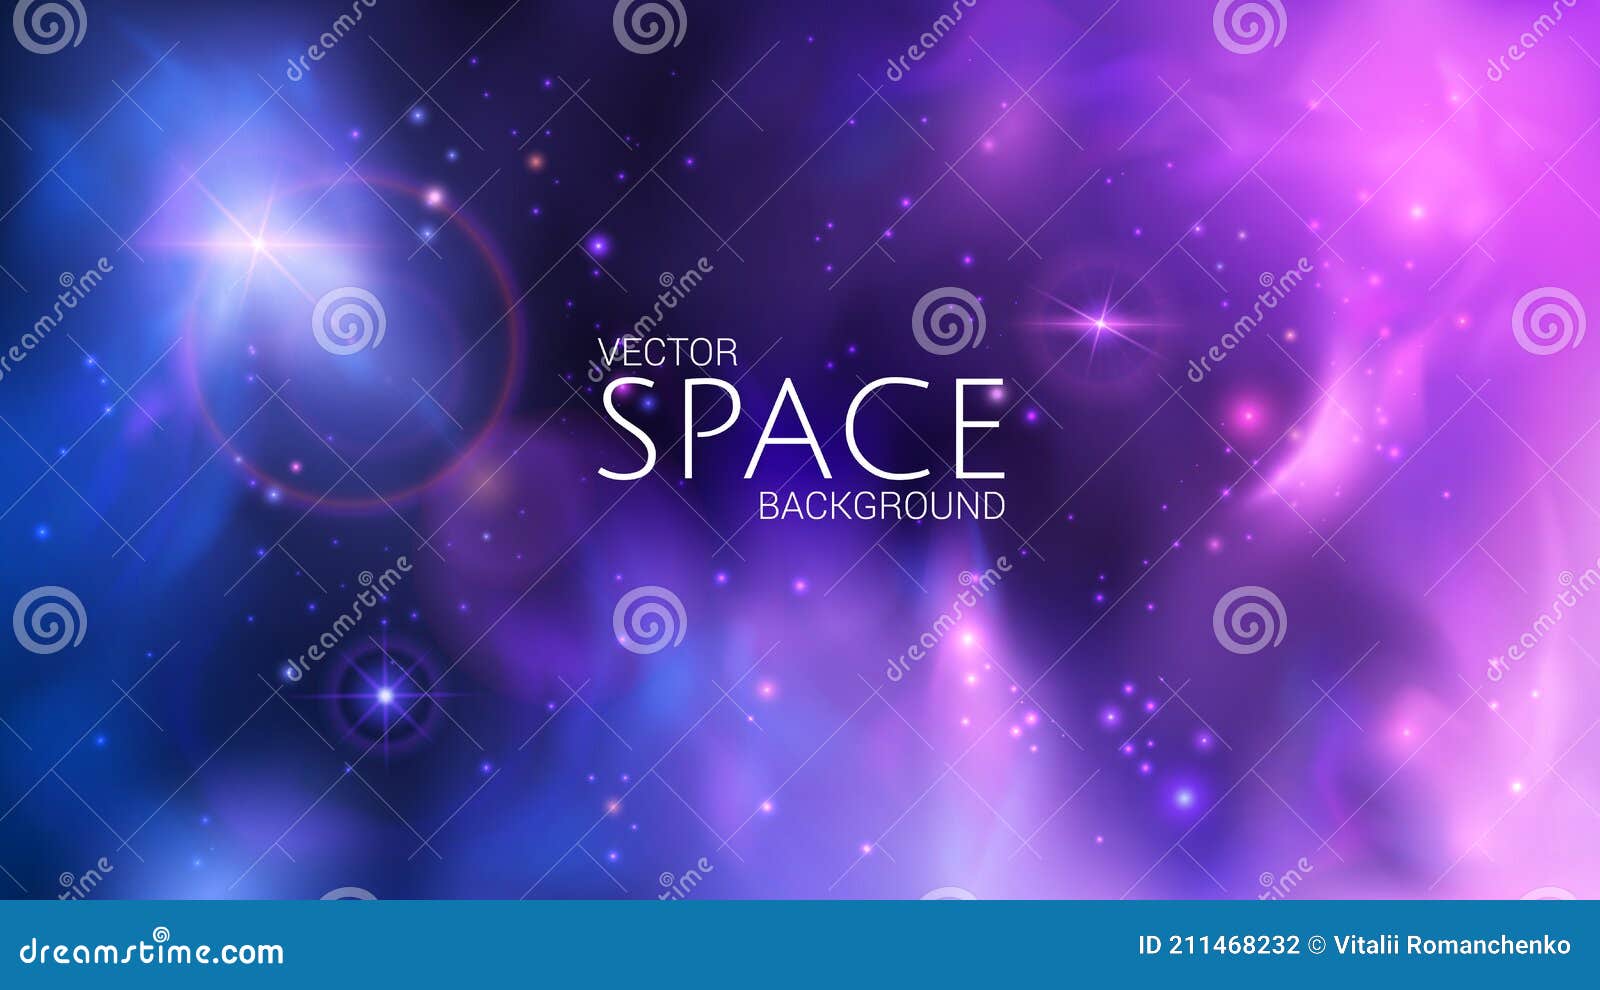  space. blue and purple blurred abstract background with reÃÂ°listic nebulae, shining stars and distant planets.